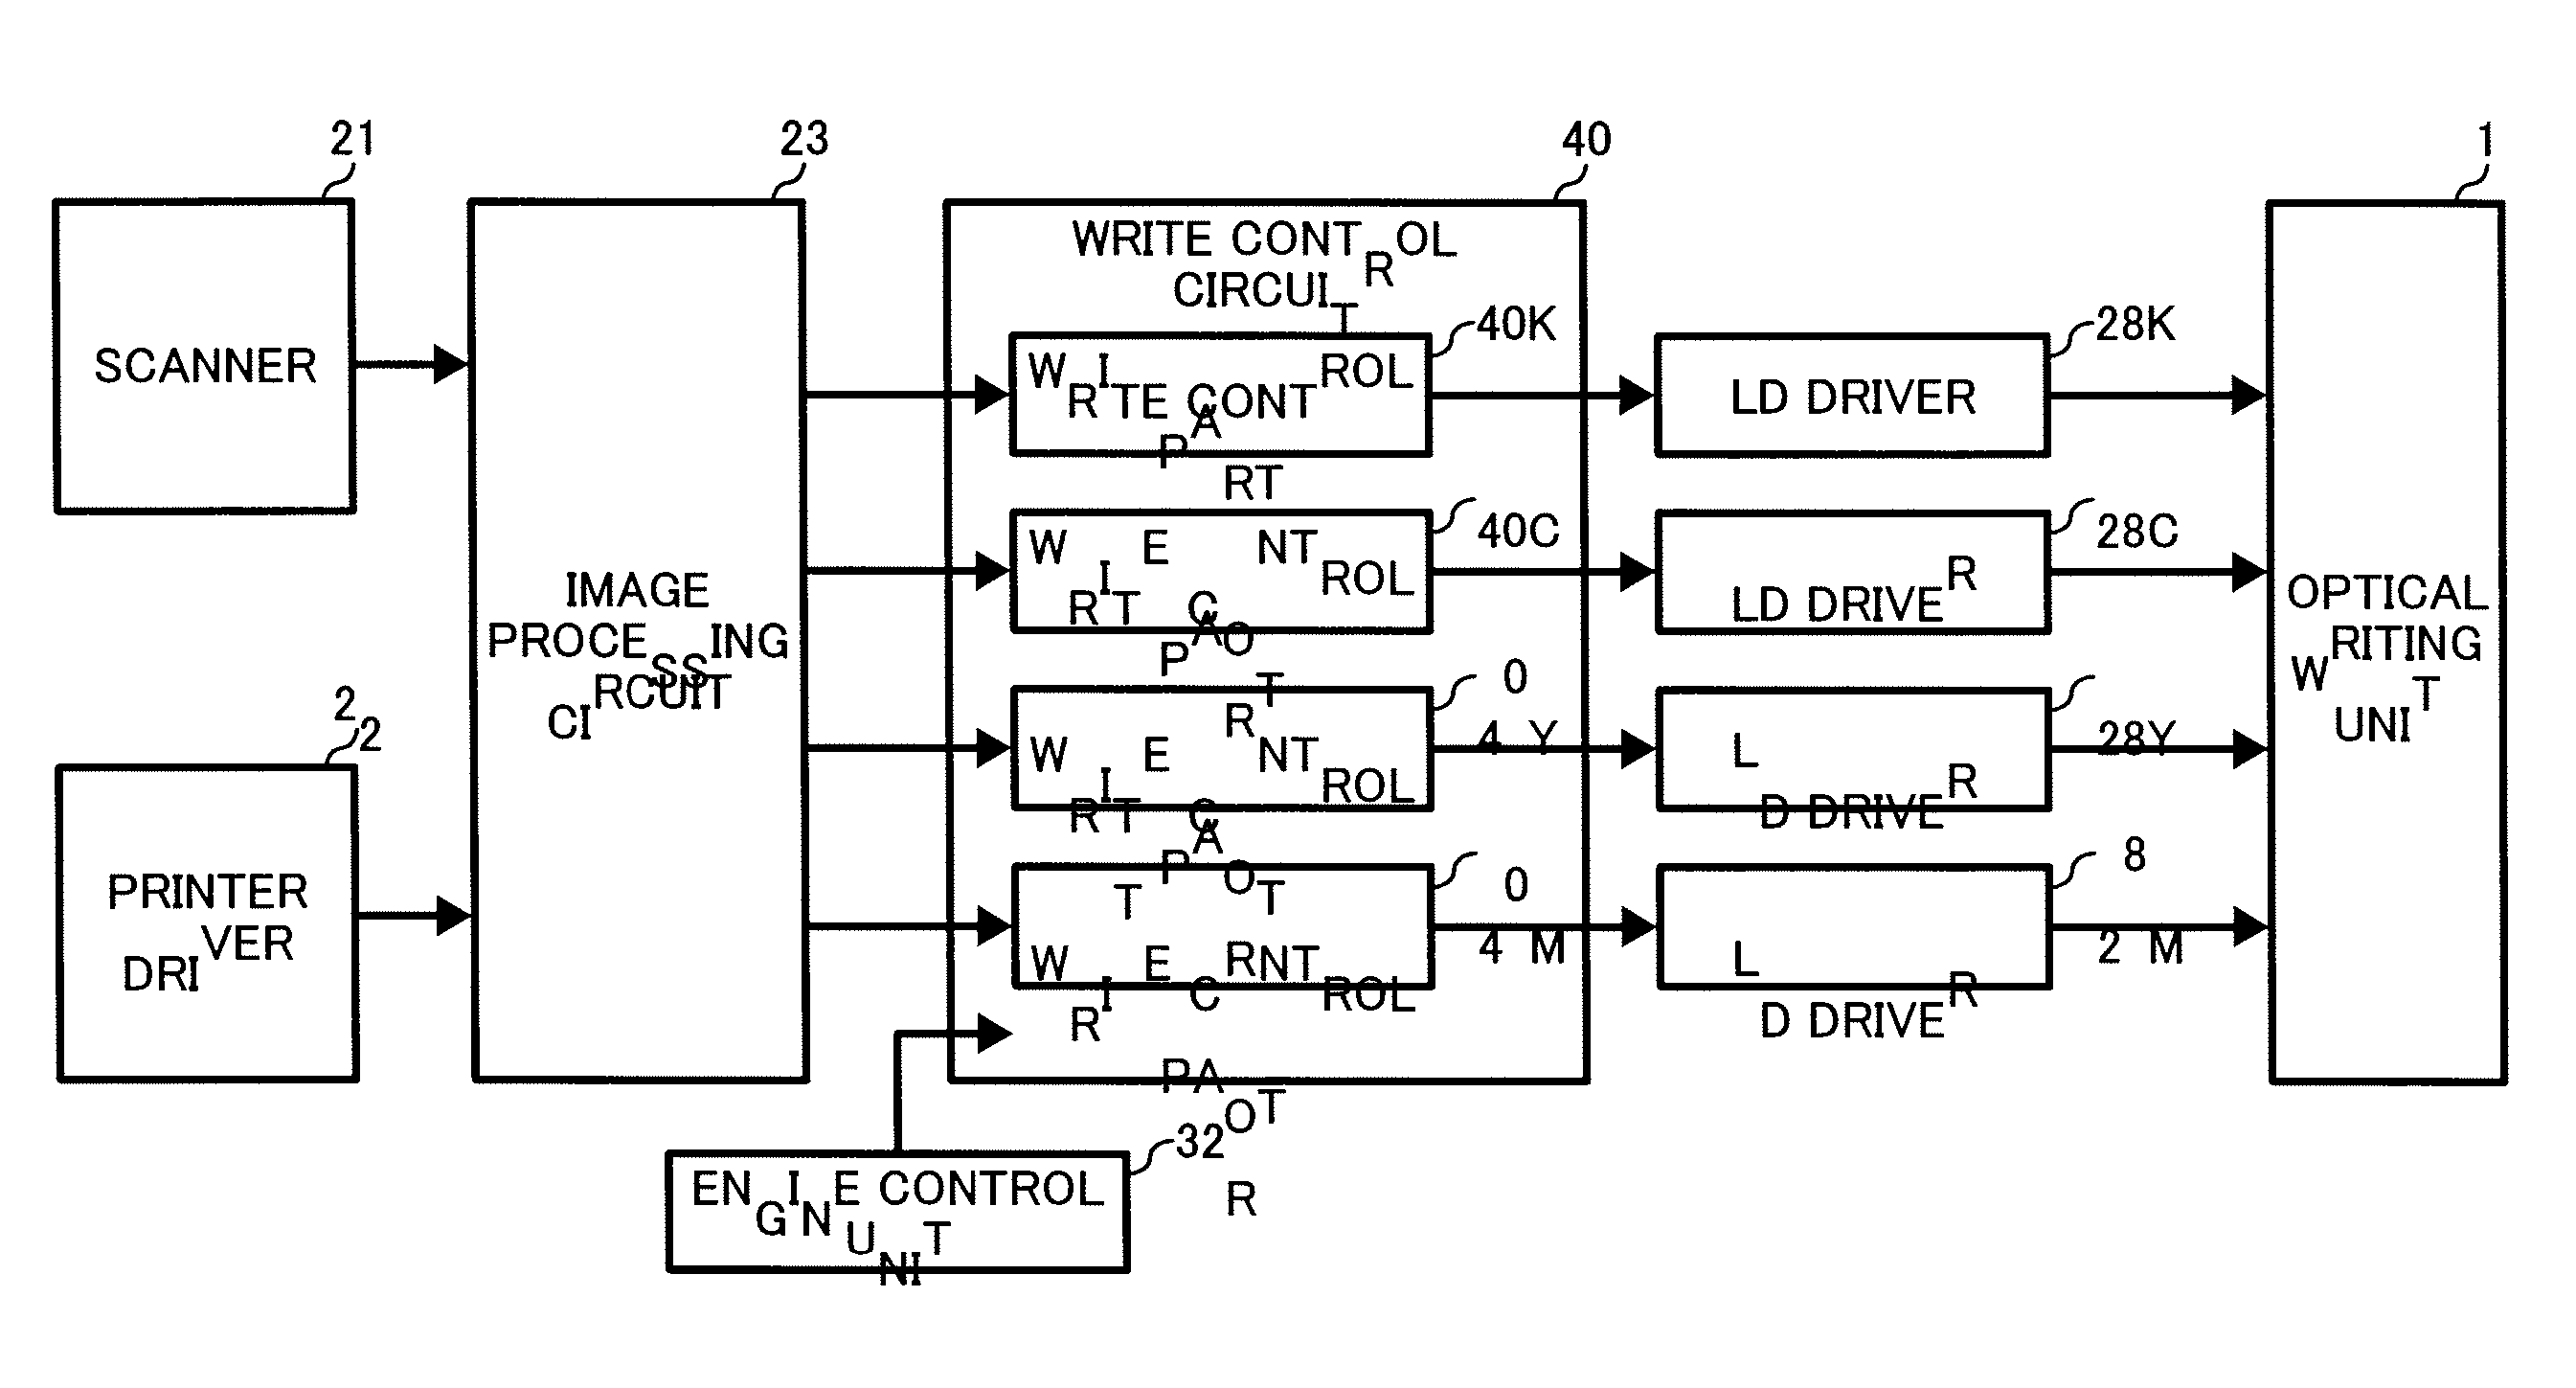 Write control circuit with optimized functional distribution